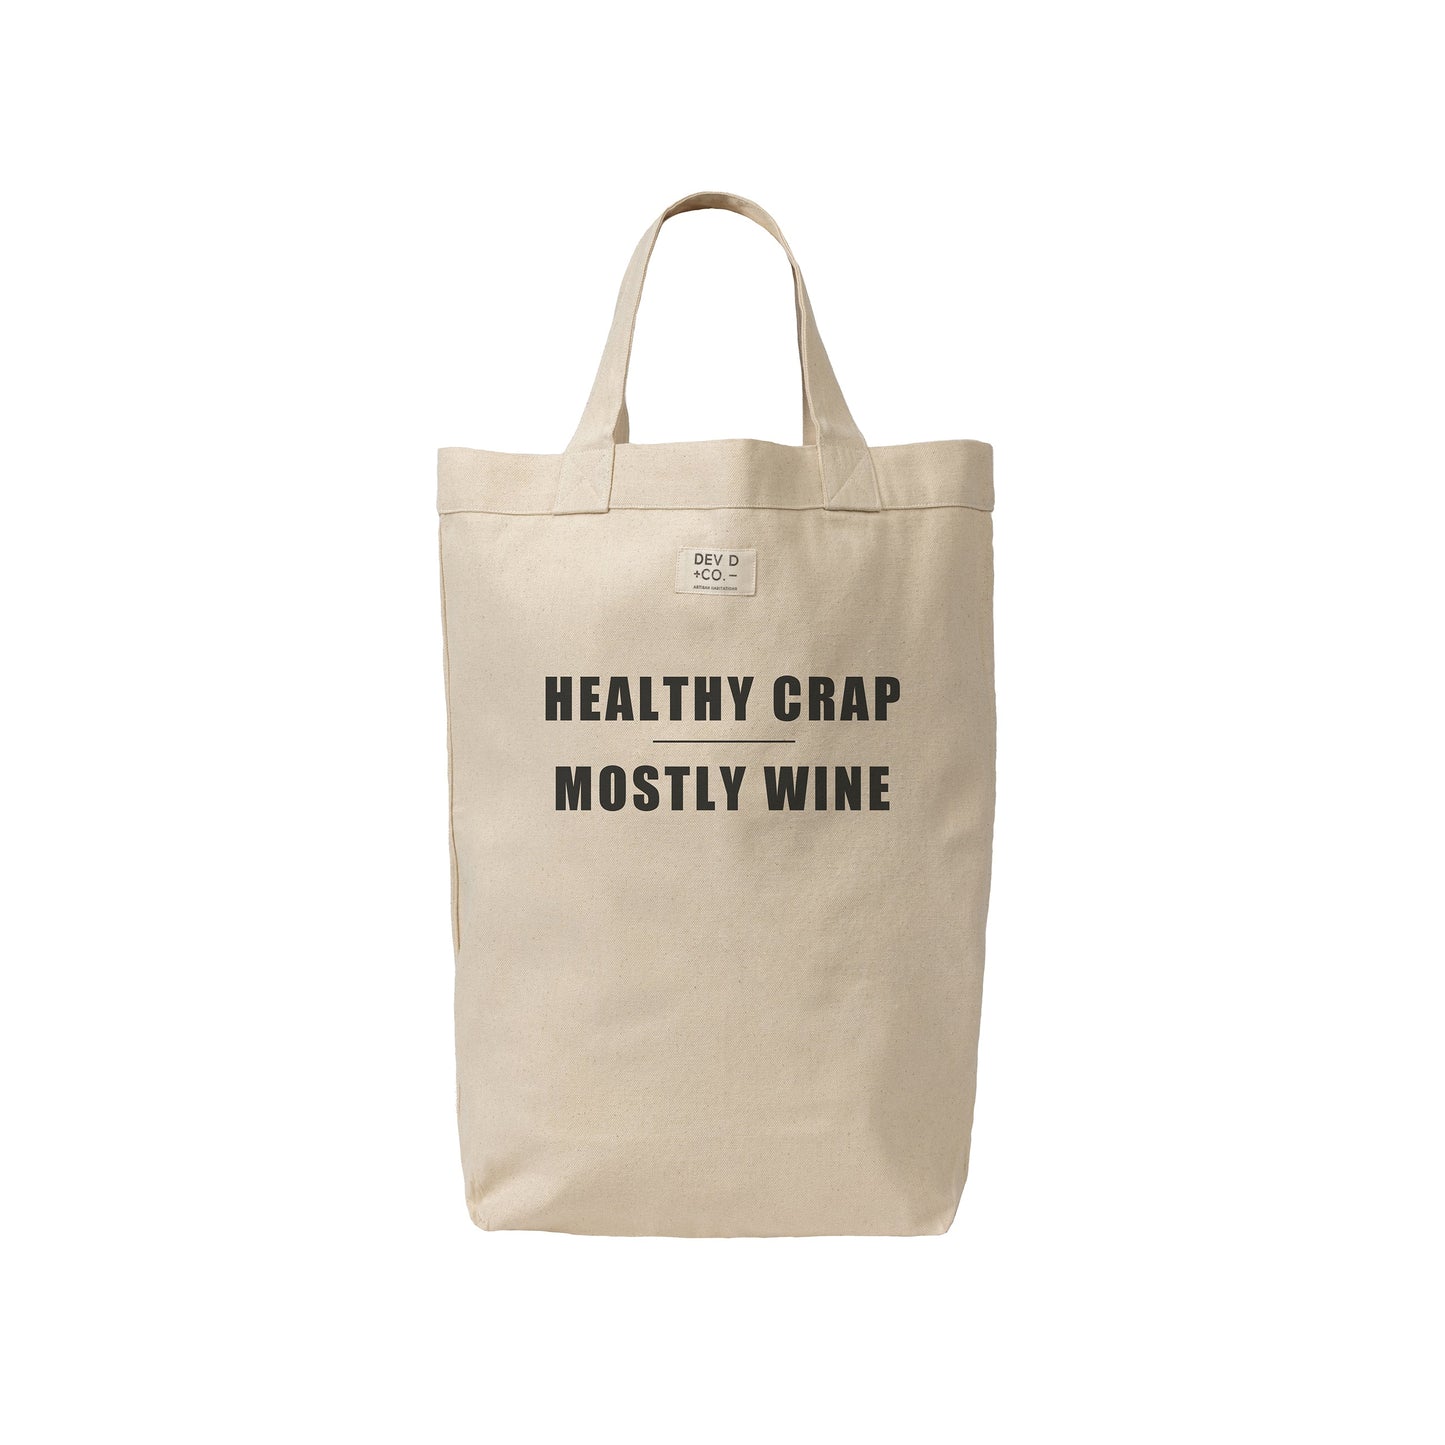 Healthy Crap Mostly Wine - Canvas Tote Bag - Wine Gift